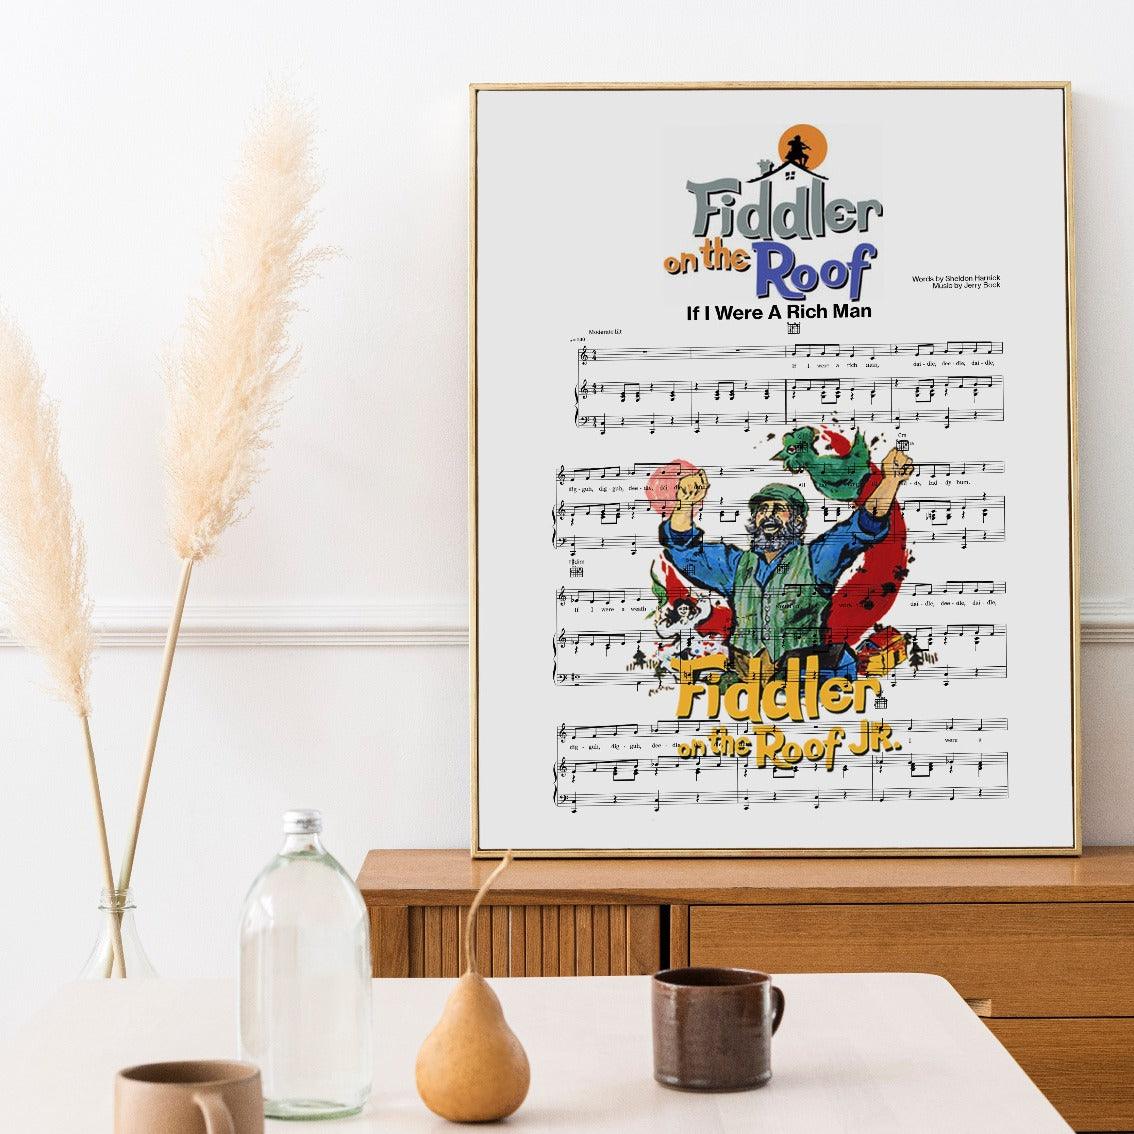 "If I Were a Rich Man" is one of the most famous and well-loved songs from the musical Fiddler on the Roof. This beautiful poster print celebrates the song and its lyrics, making it the perfect gift for any music lover or fan of the show. The print is available in a range of sizes and can be personalized with a special message or the name of the recipient.